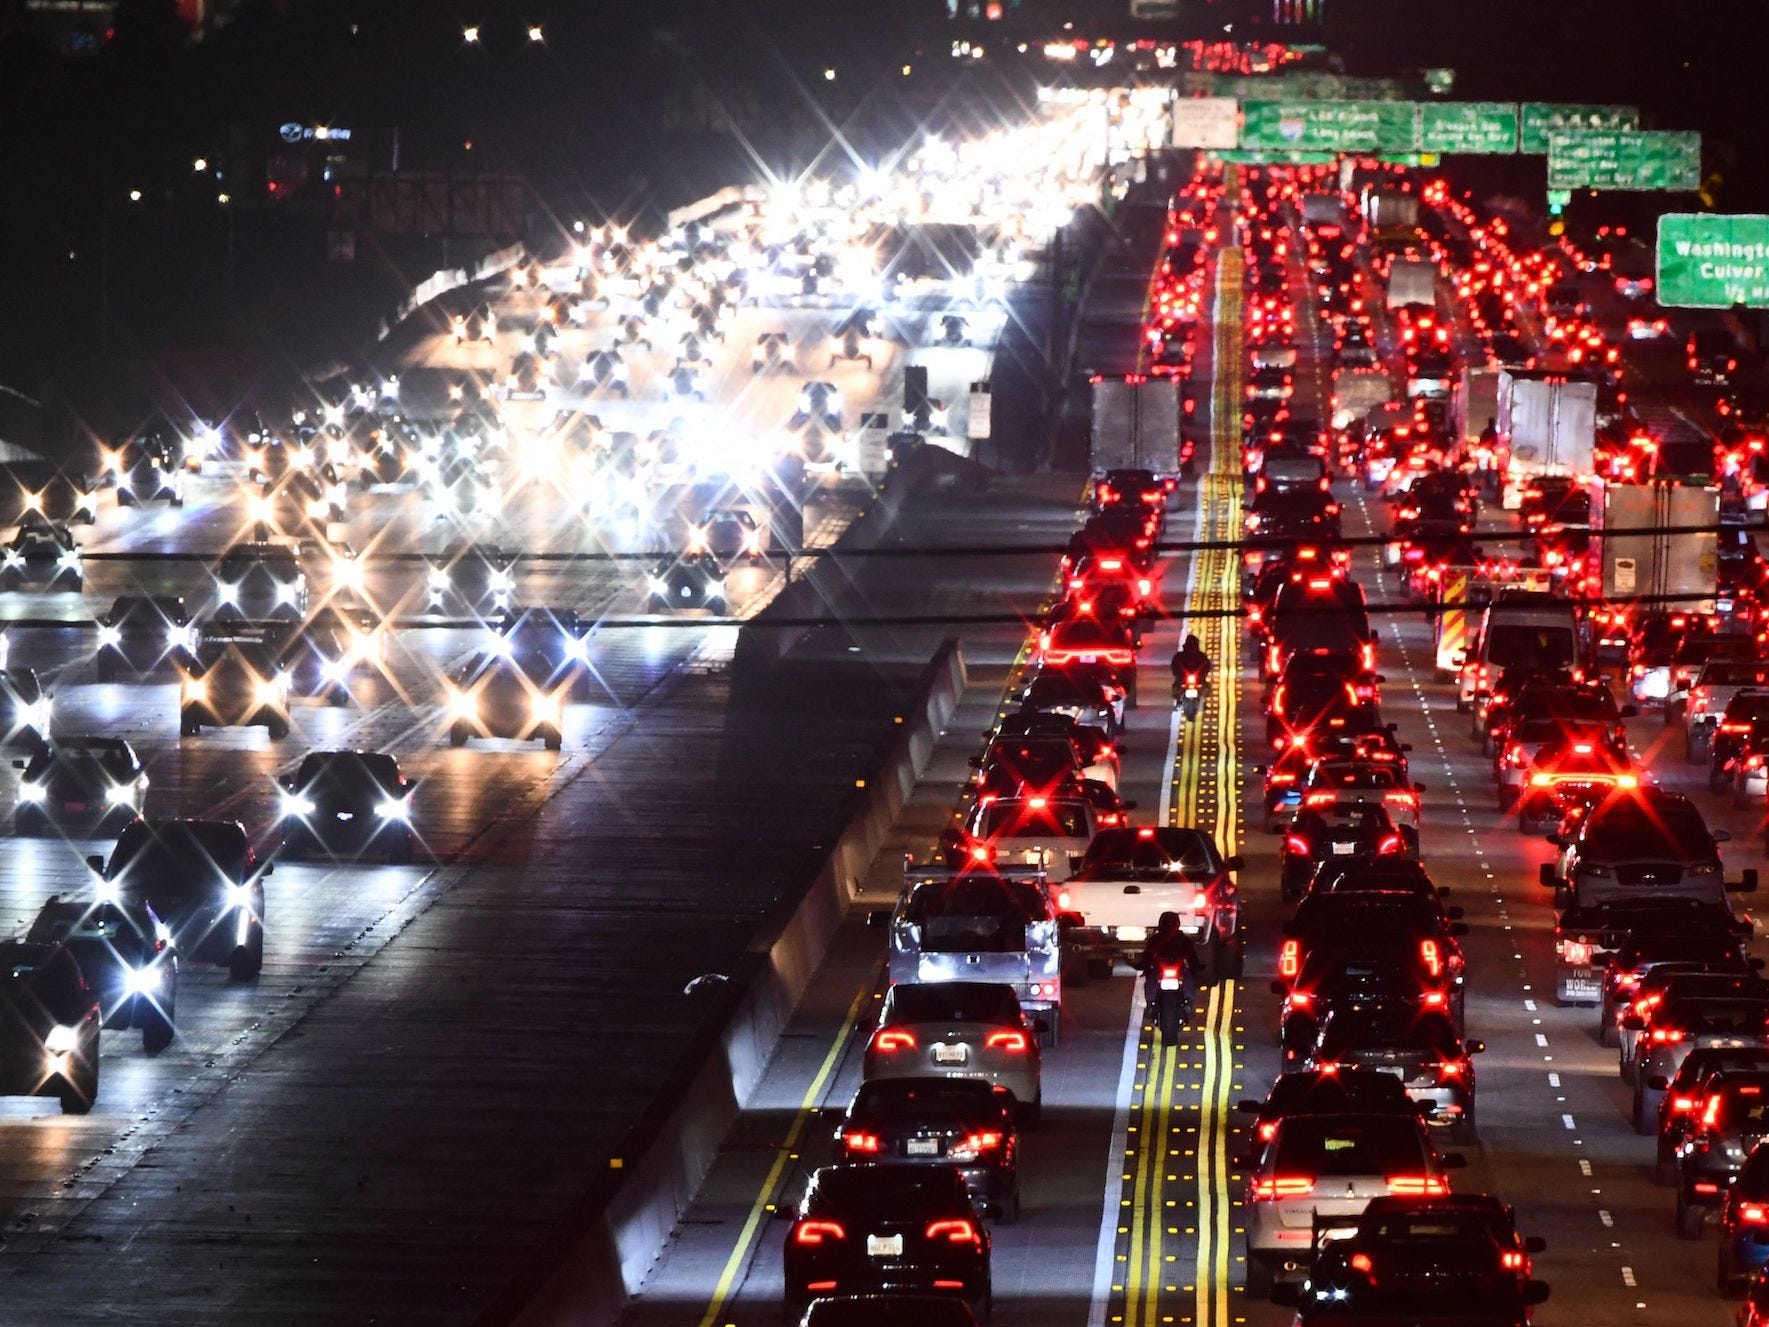 The 405 Freeway in California during rush hour traffic.